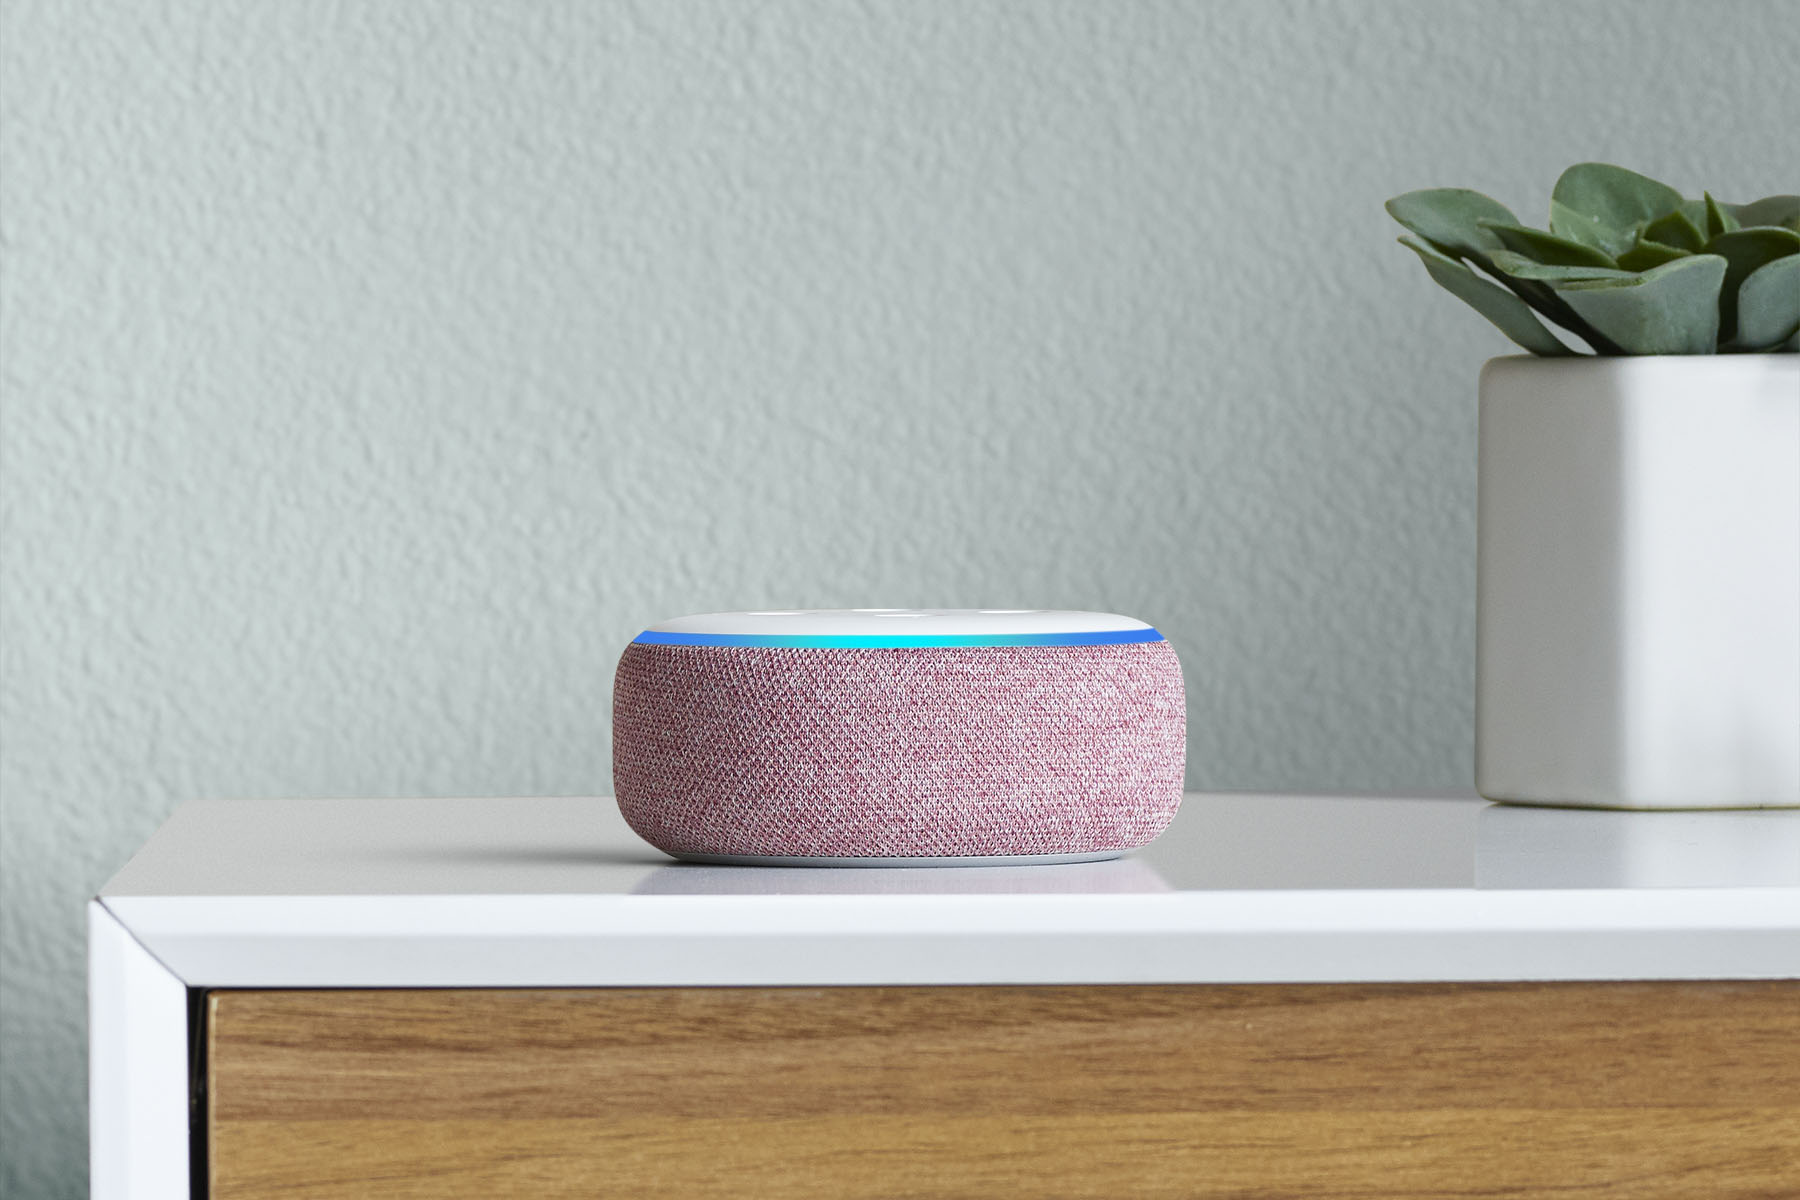 Image of a plum Amazon Echo Dot sitting on a dresser, next to a succulent plant in a white pot